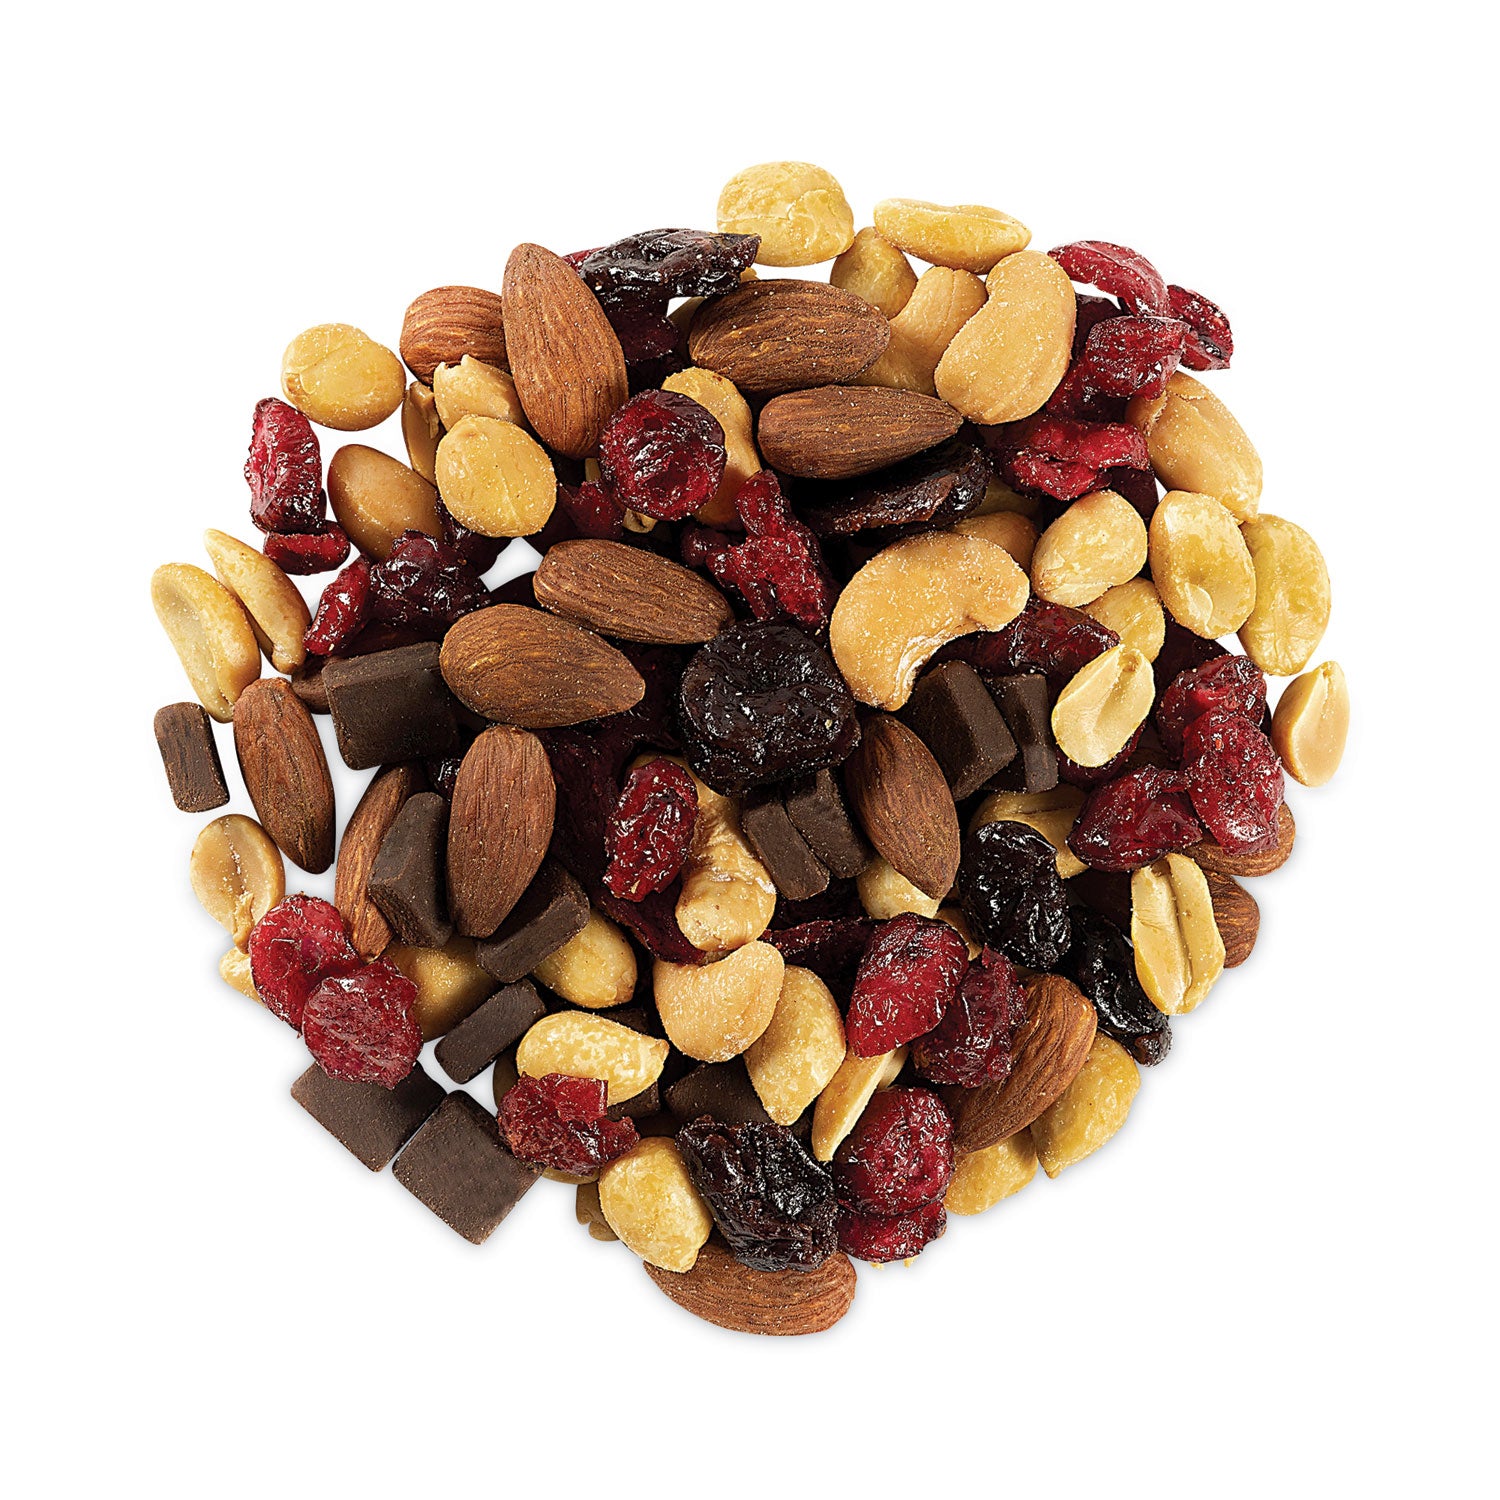 wholesome-medley-trail-mix-15-oz-bag-16-bags-carton-ships-in-1-3-business-days_grr28800013 - 2